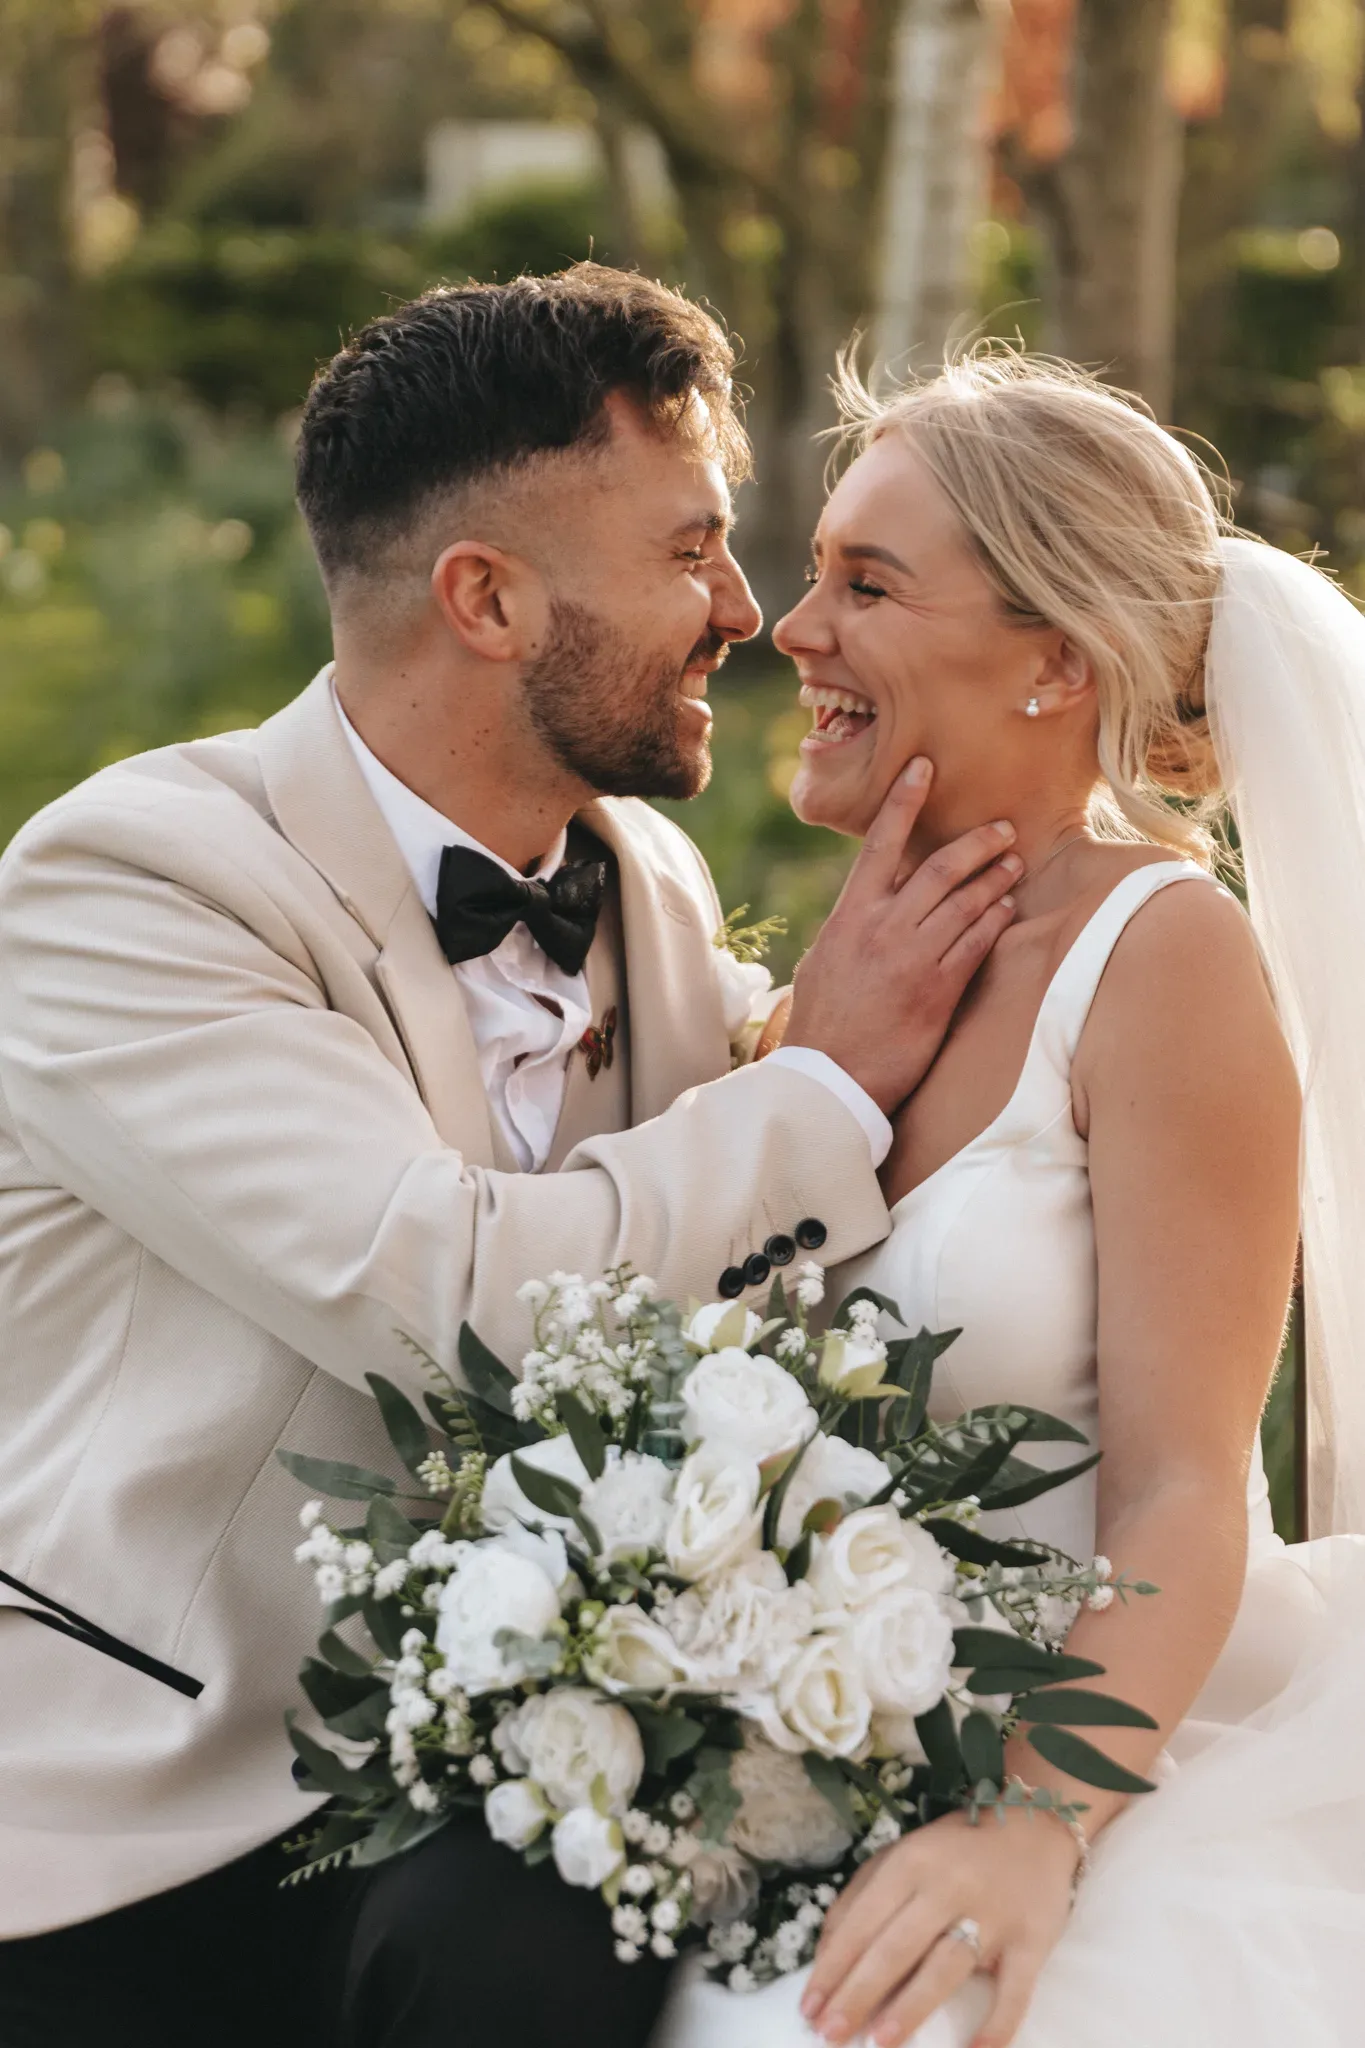 A joyful bride and groom in wedding attire share a close moment, smiling at each other outdoors. the bride holds a bouquet of white flowers. sunlight filters through trees in the background.